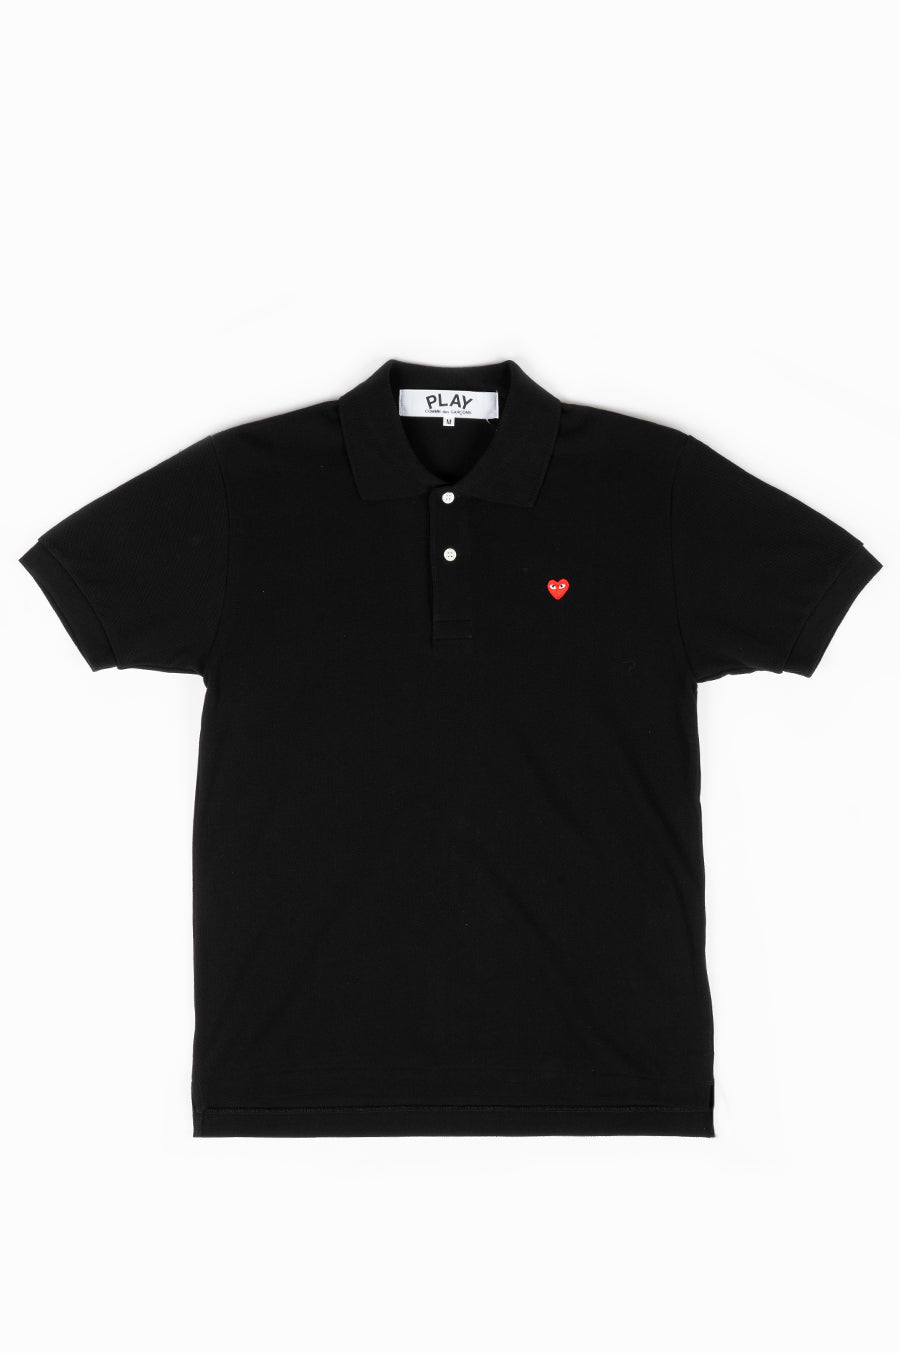 COMME DES GARCONS PLAY POLO TSHIRT BLACK SMALL RED HEART